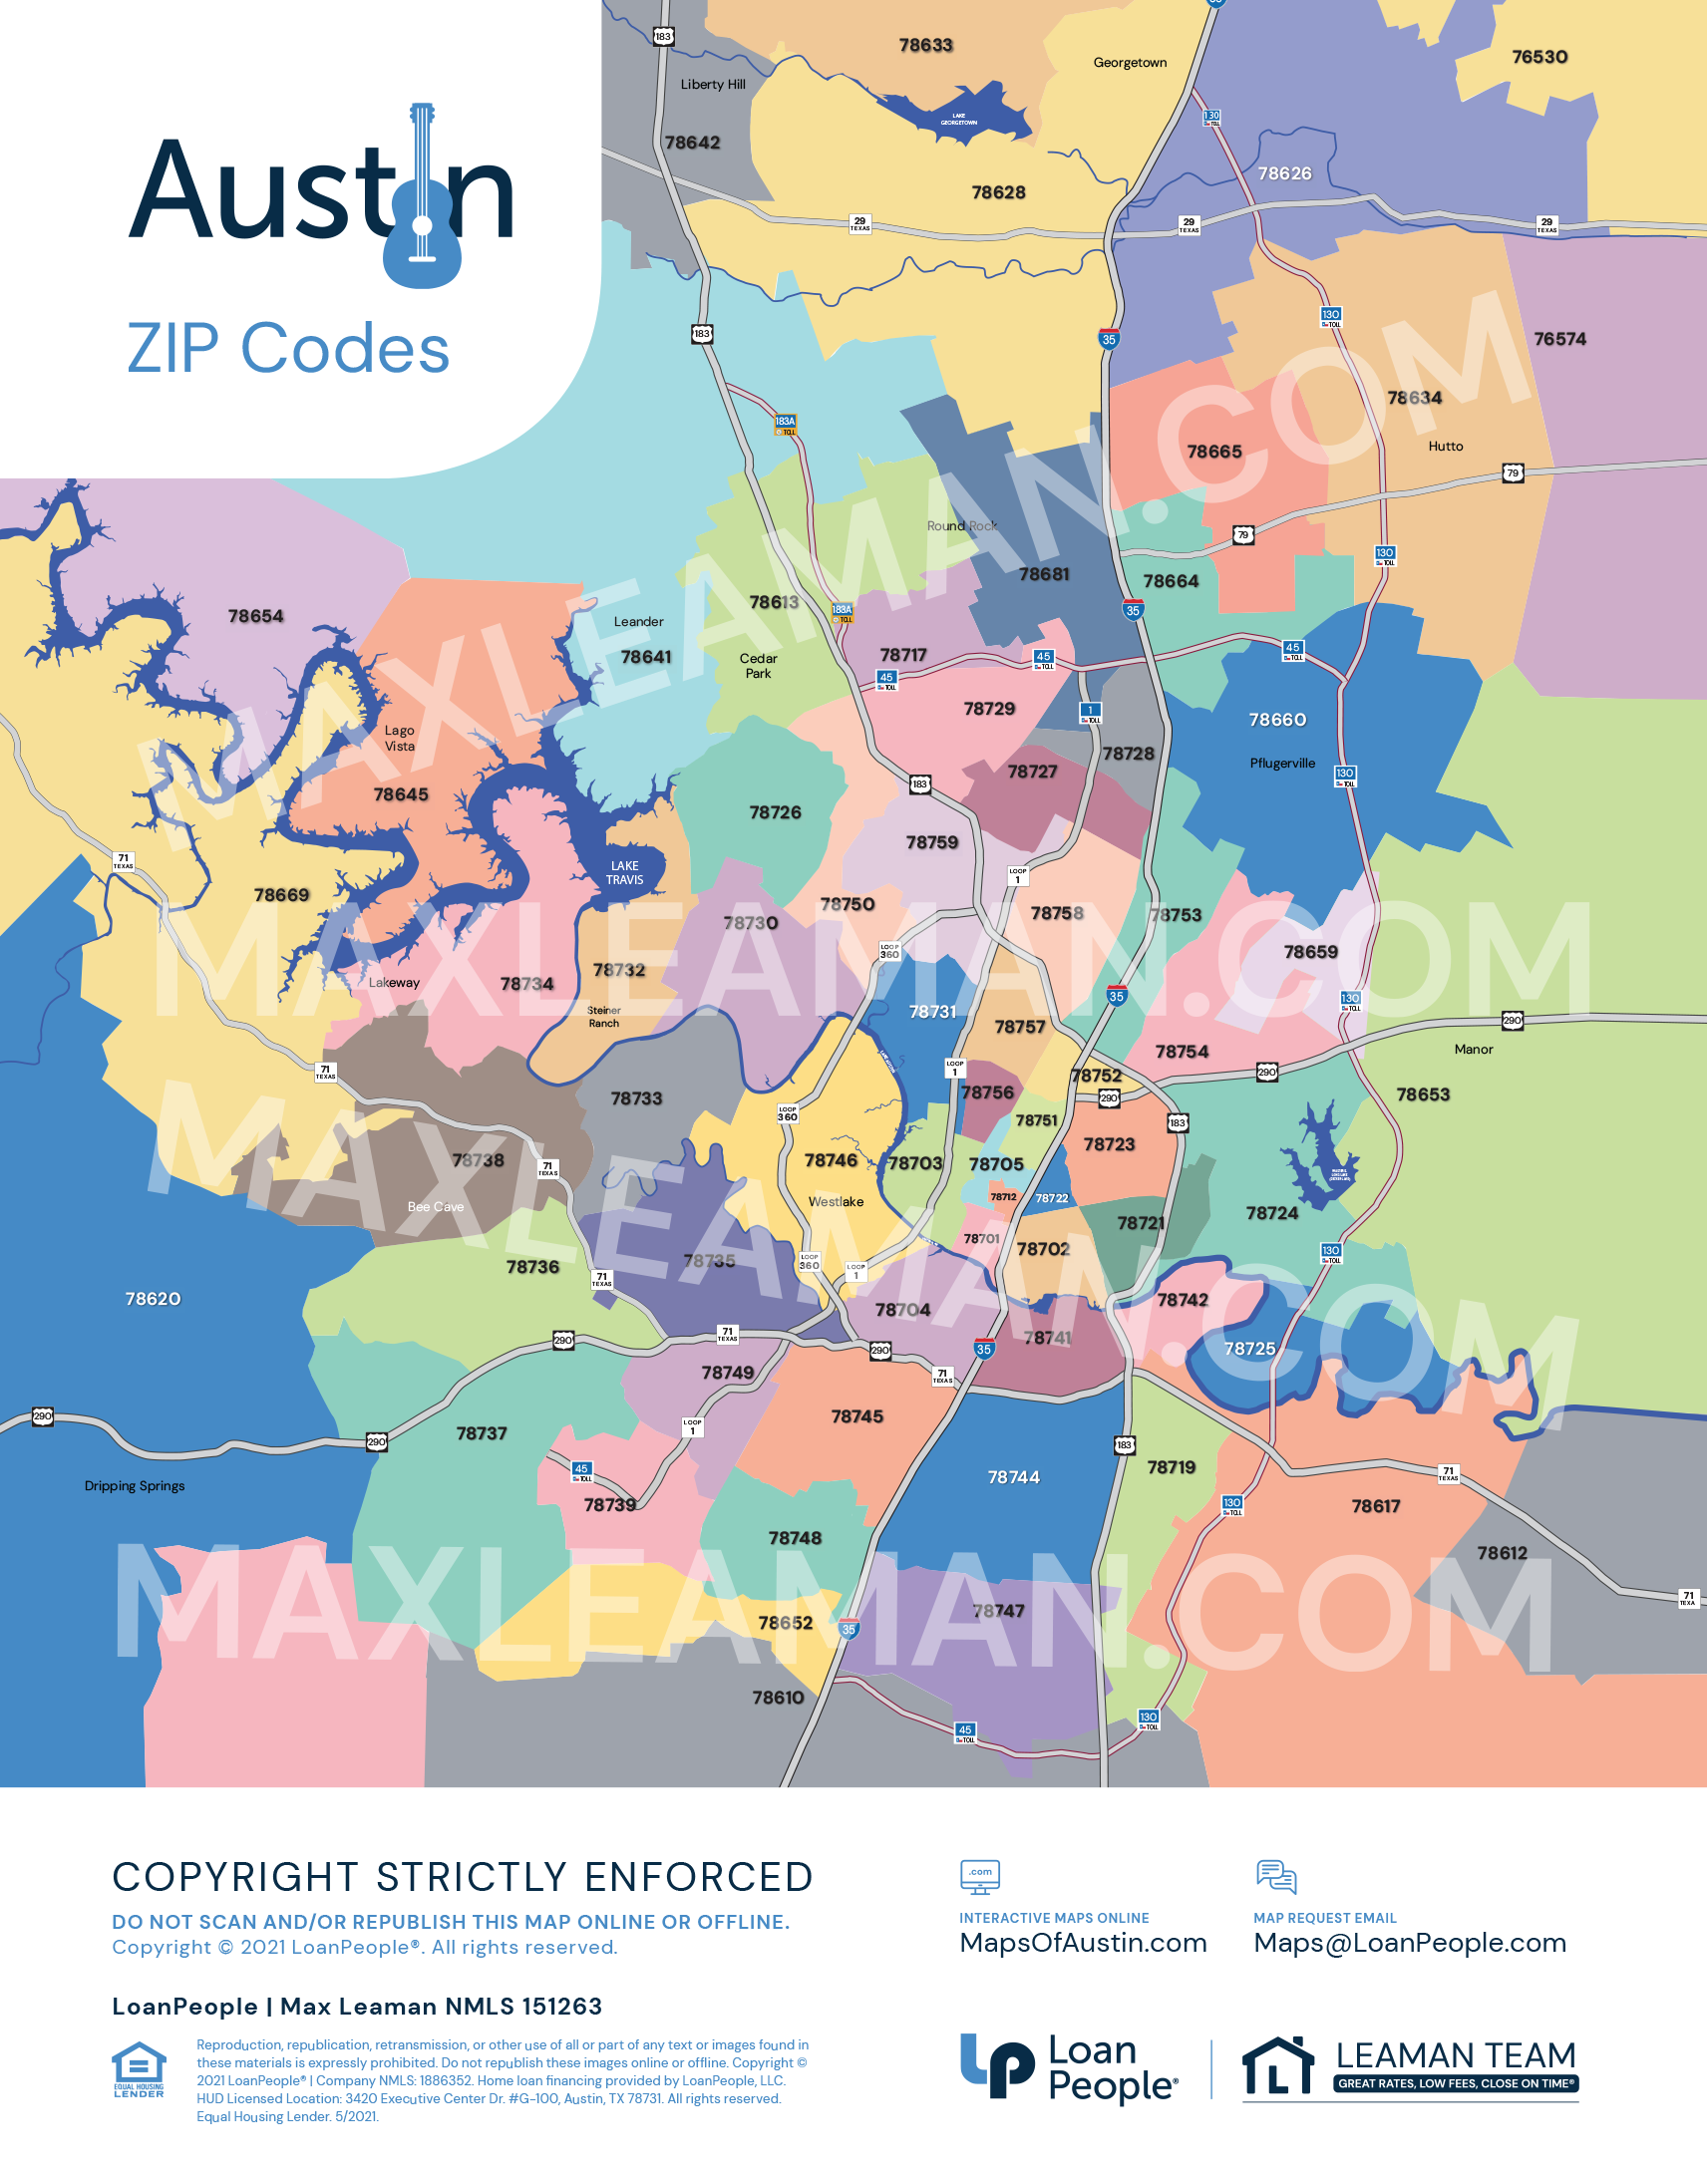 Austin Texas Zip Codes Map Greater Austin Area Zip Code Map | Mortgage Resources